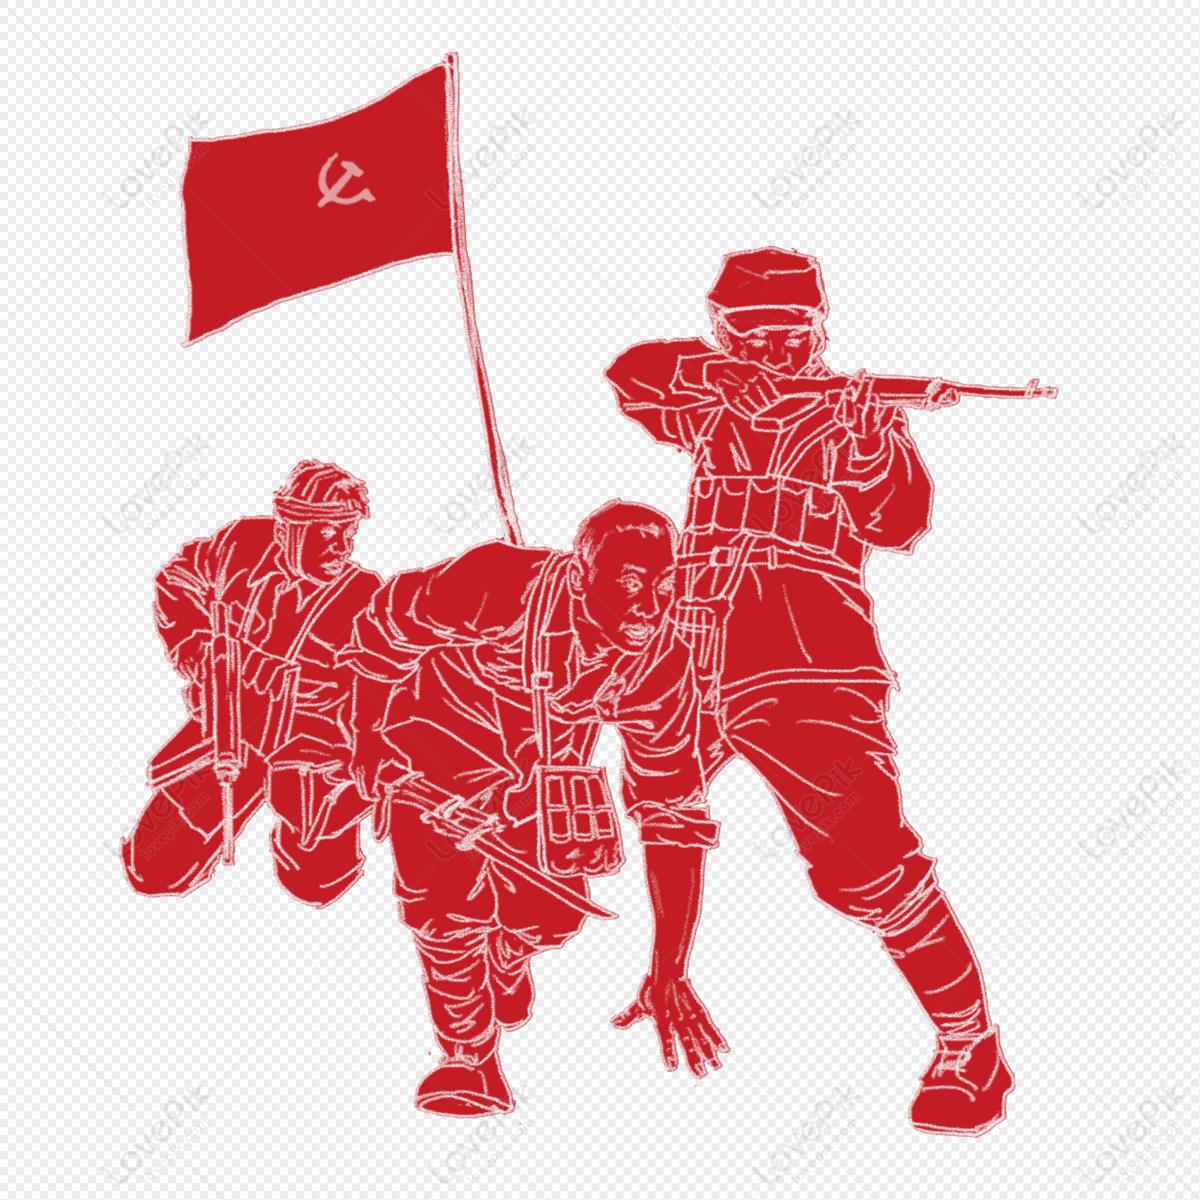 Silhouette Red Army Revolutionary Figure, Characters, Revolution, Revolutionary  Free PNG And Clipart Image For Free Download - Lovepik